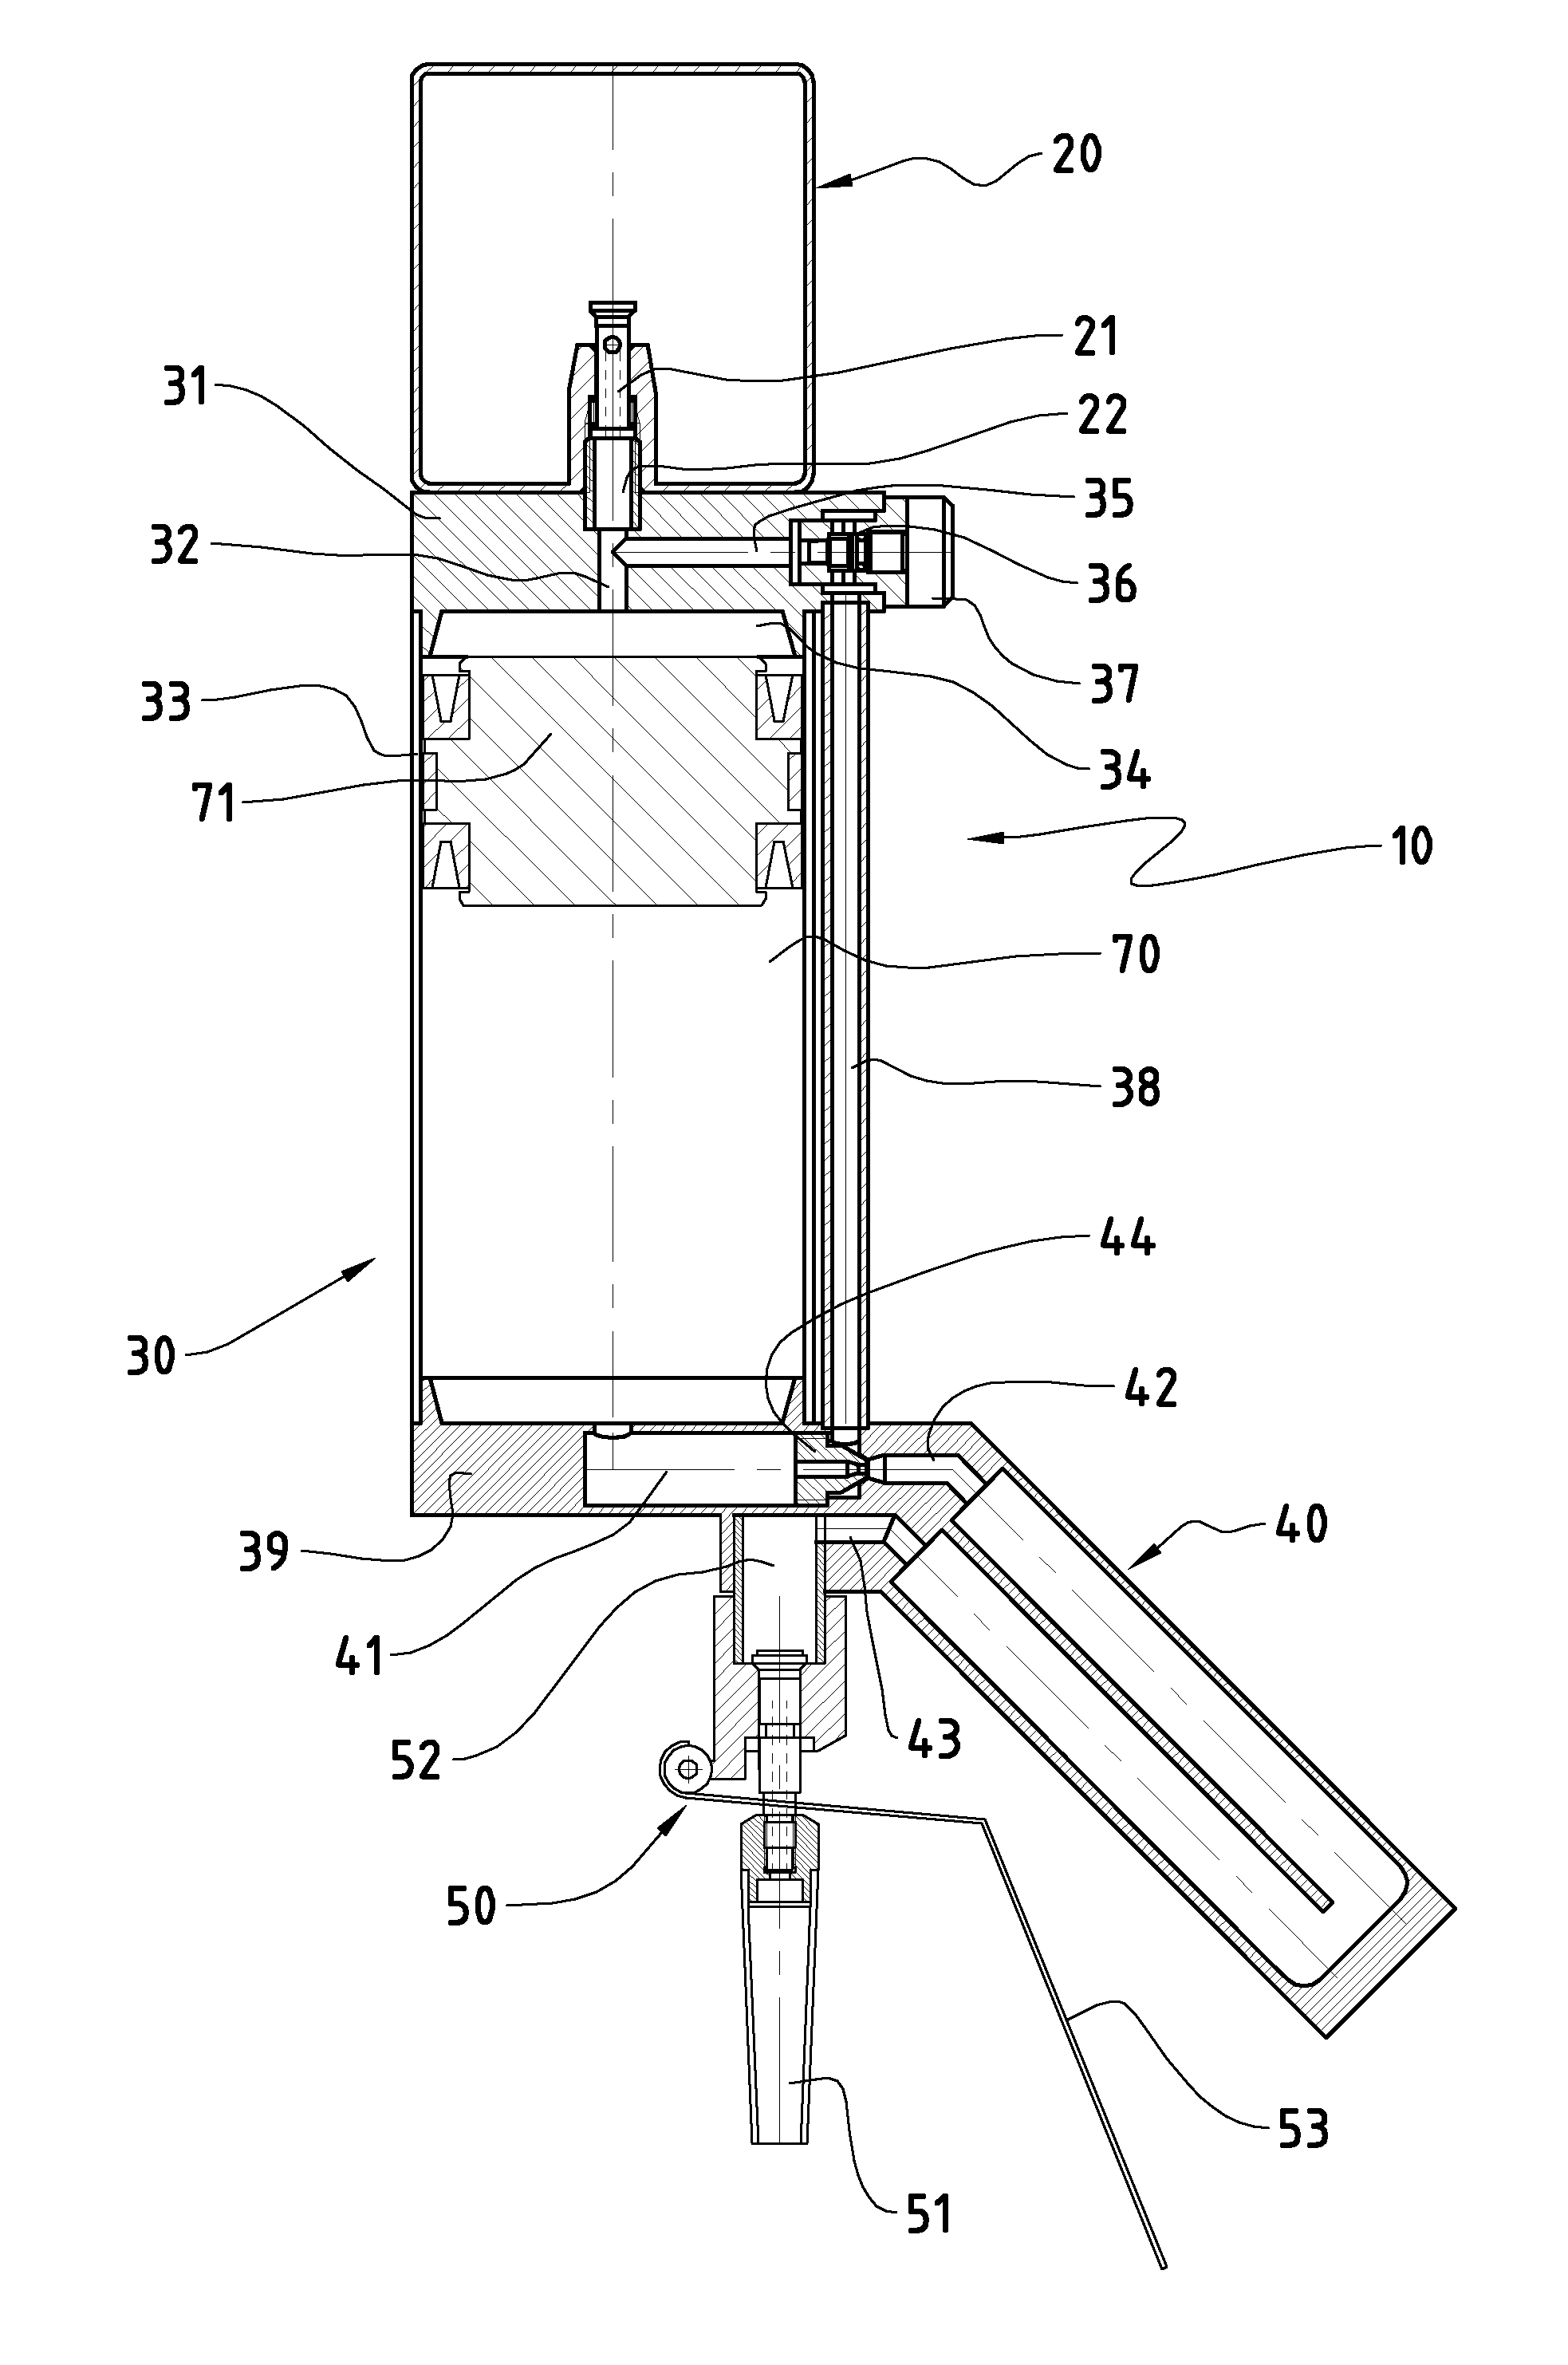 Device for foaming and delivery of liquids